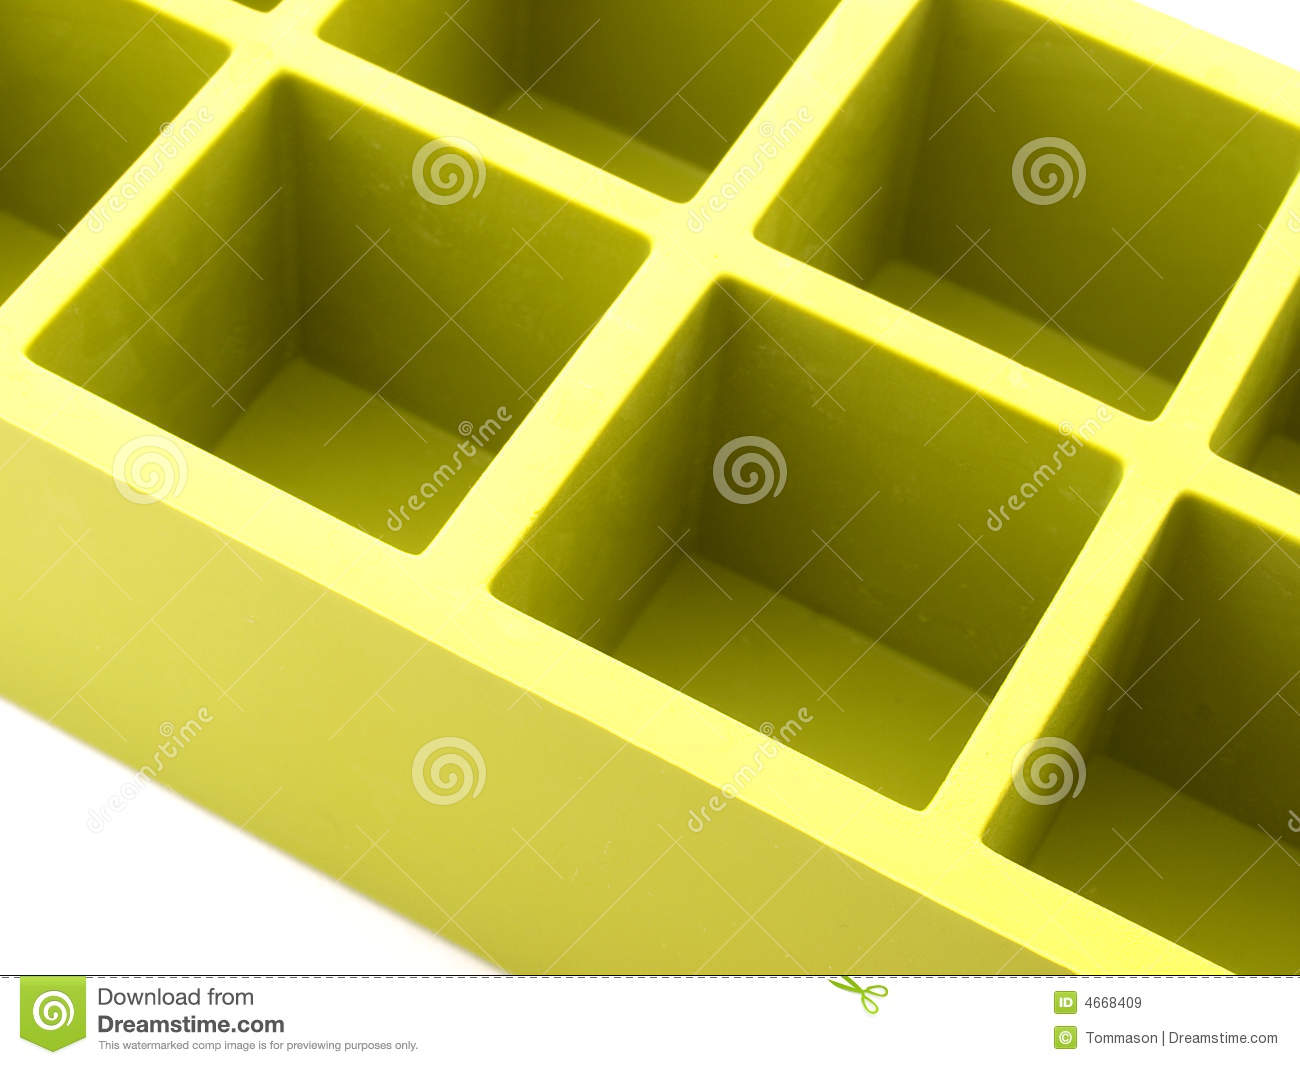 Ice Cube Tray Royalty Free Stock Images   Image  4668409